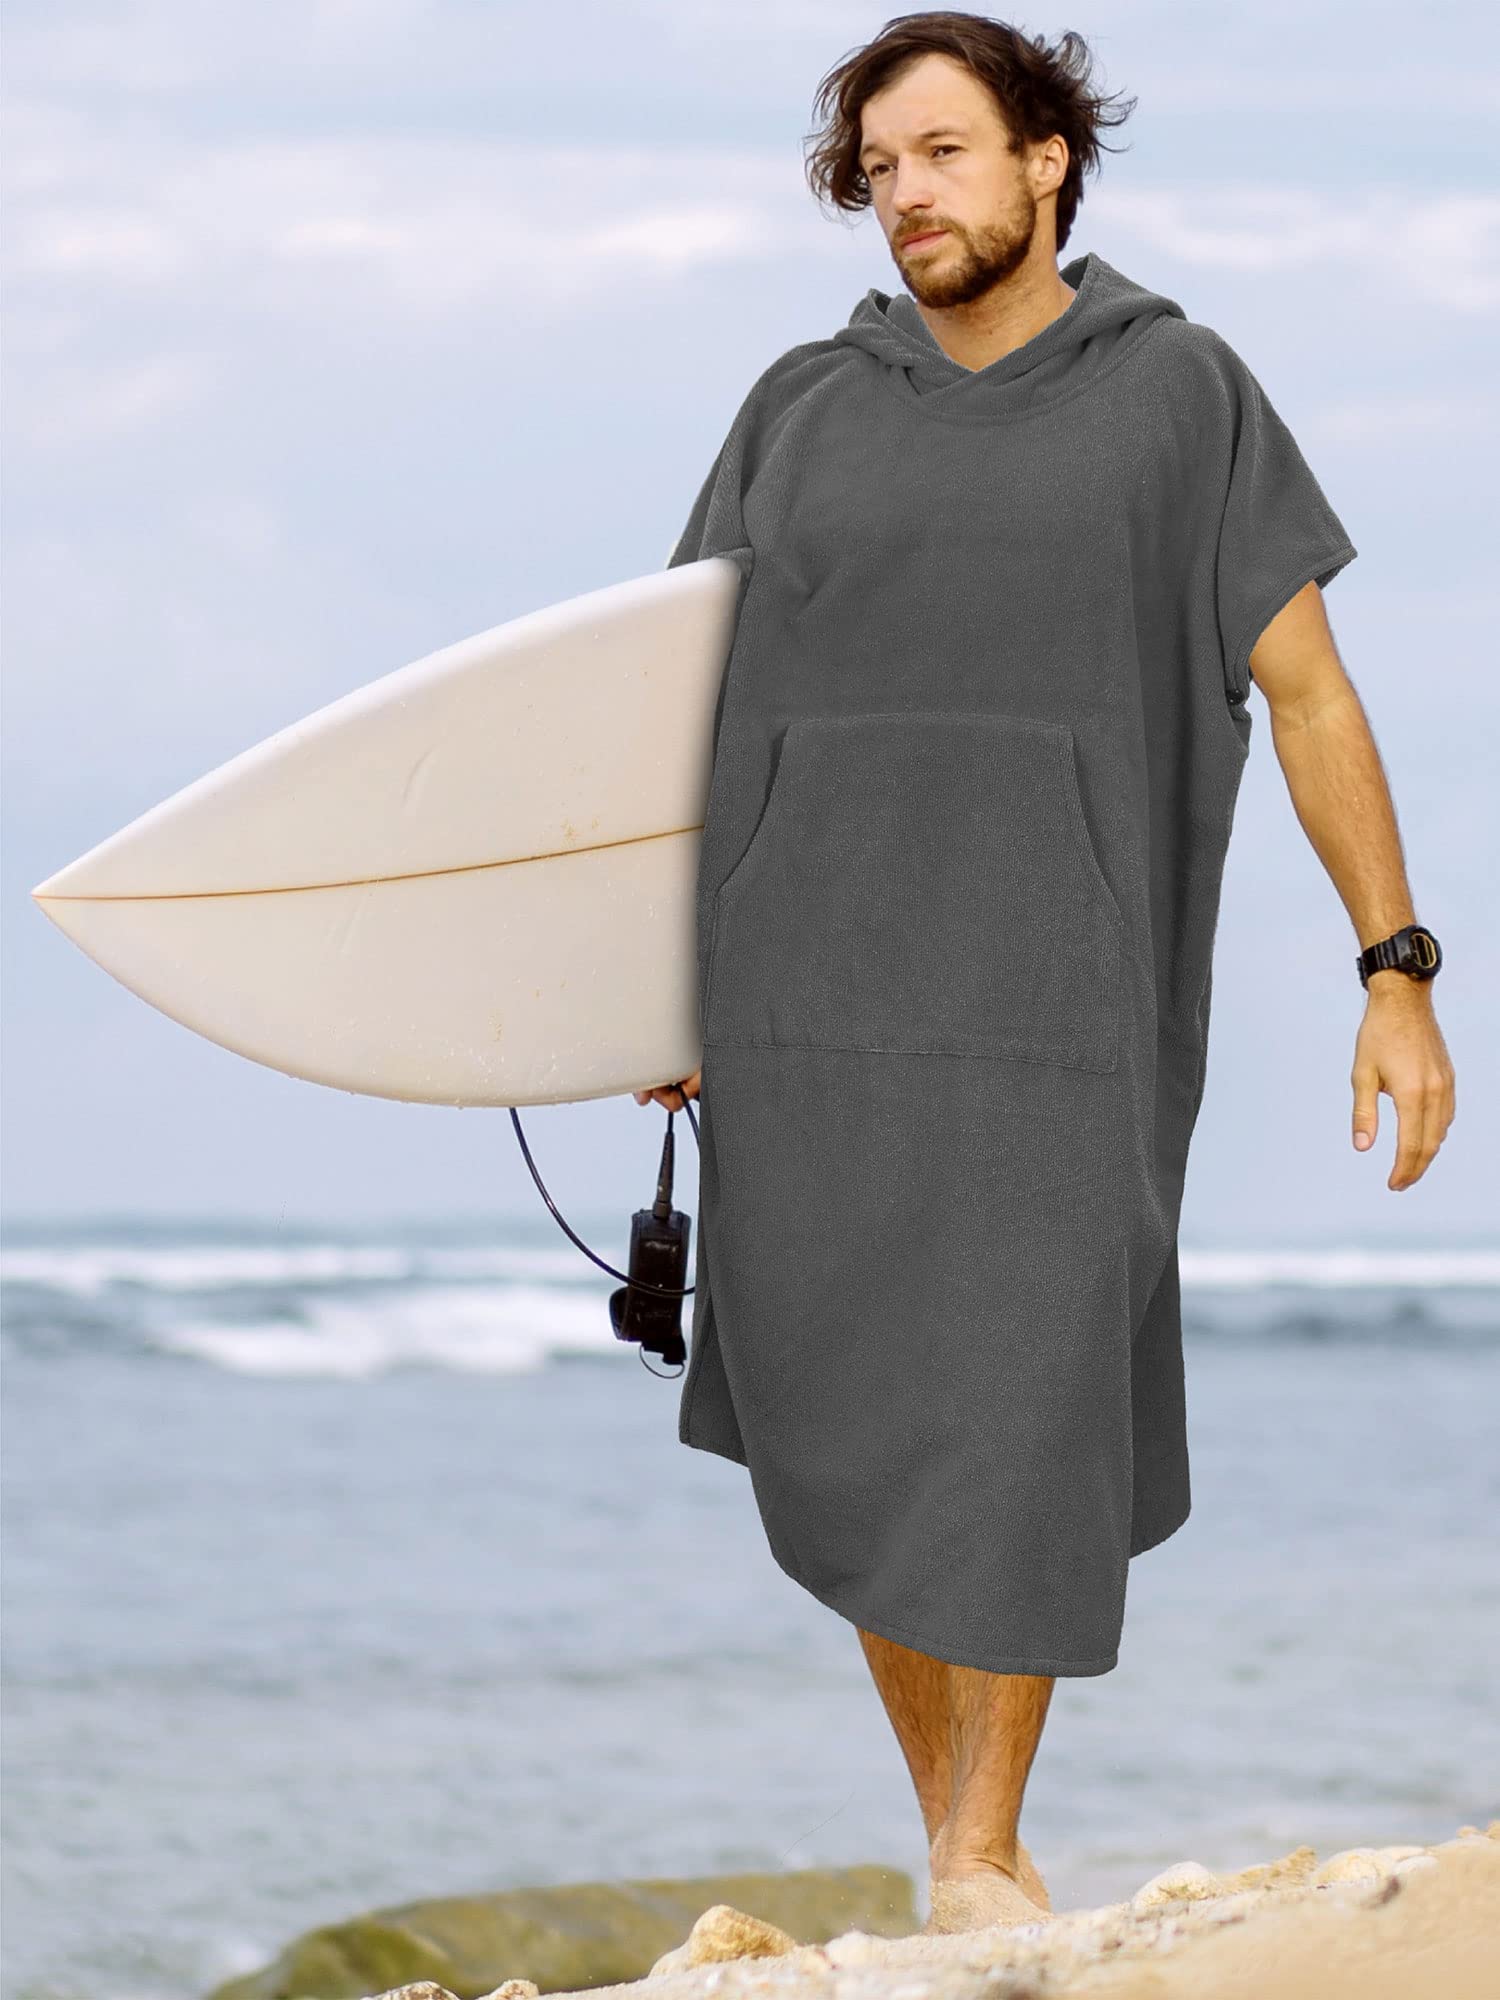 SUN CUBE Surf Poncho Changing Robe with Hood, Thick Quick Dry Microfiber Wetsuit Changing Towel for Surfing Beach Swim Outdoor Sports Men, Absorbent Wearable Towel Cover Up with Pocket, Gray